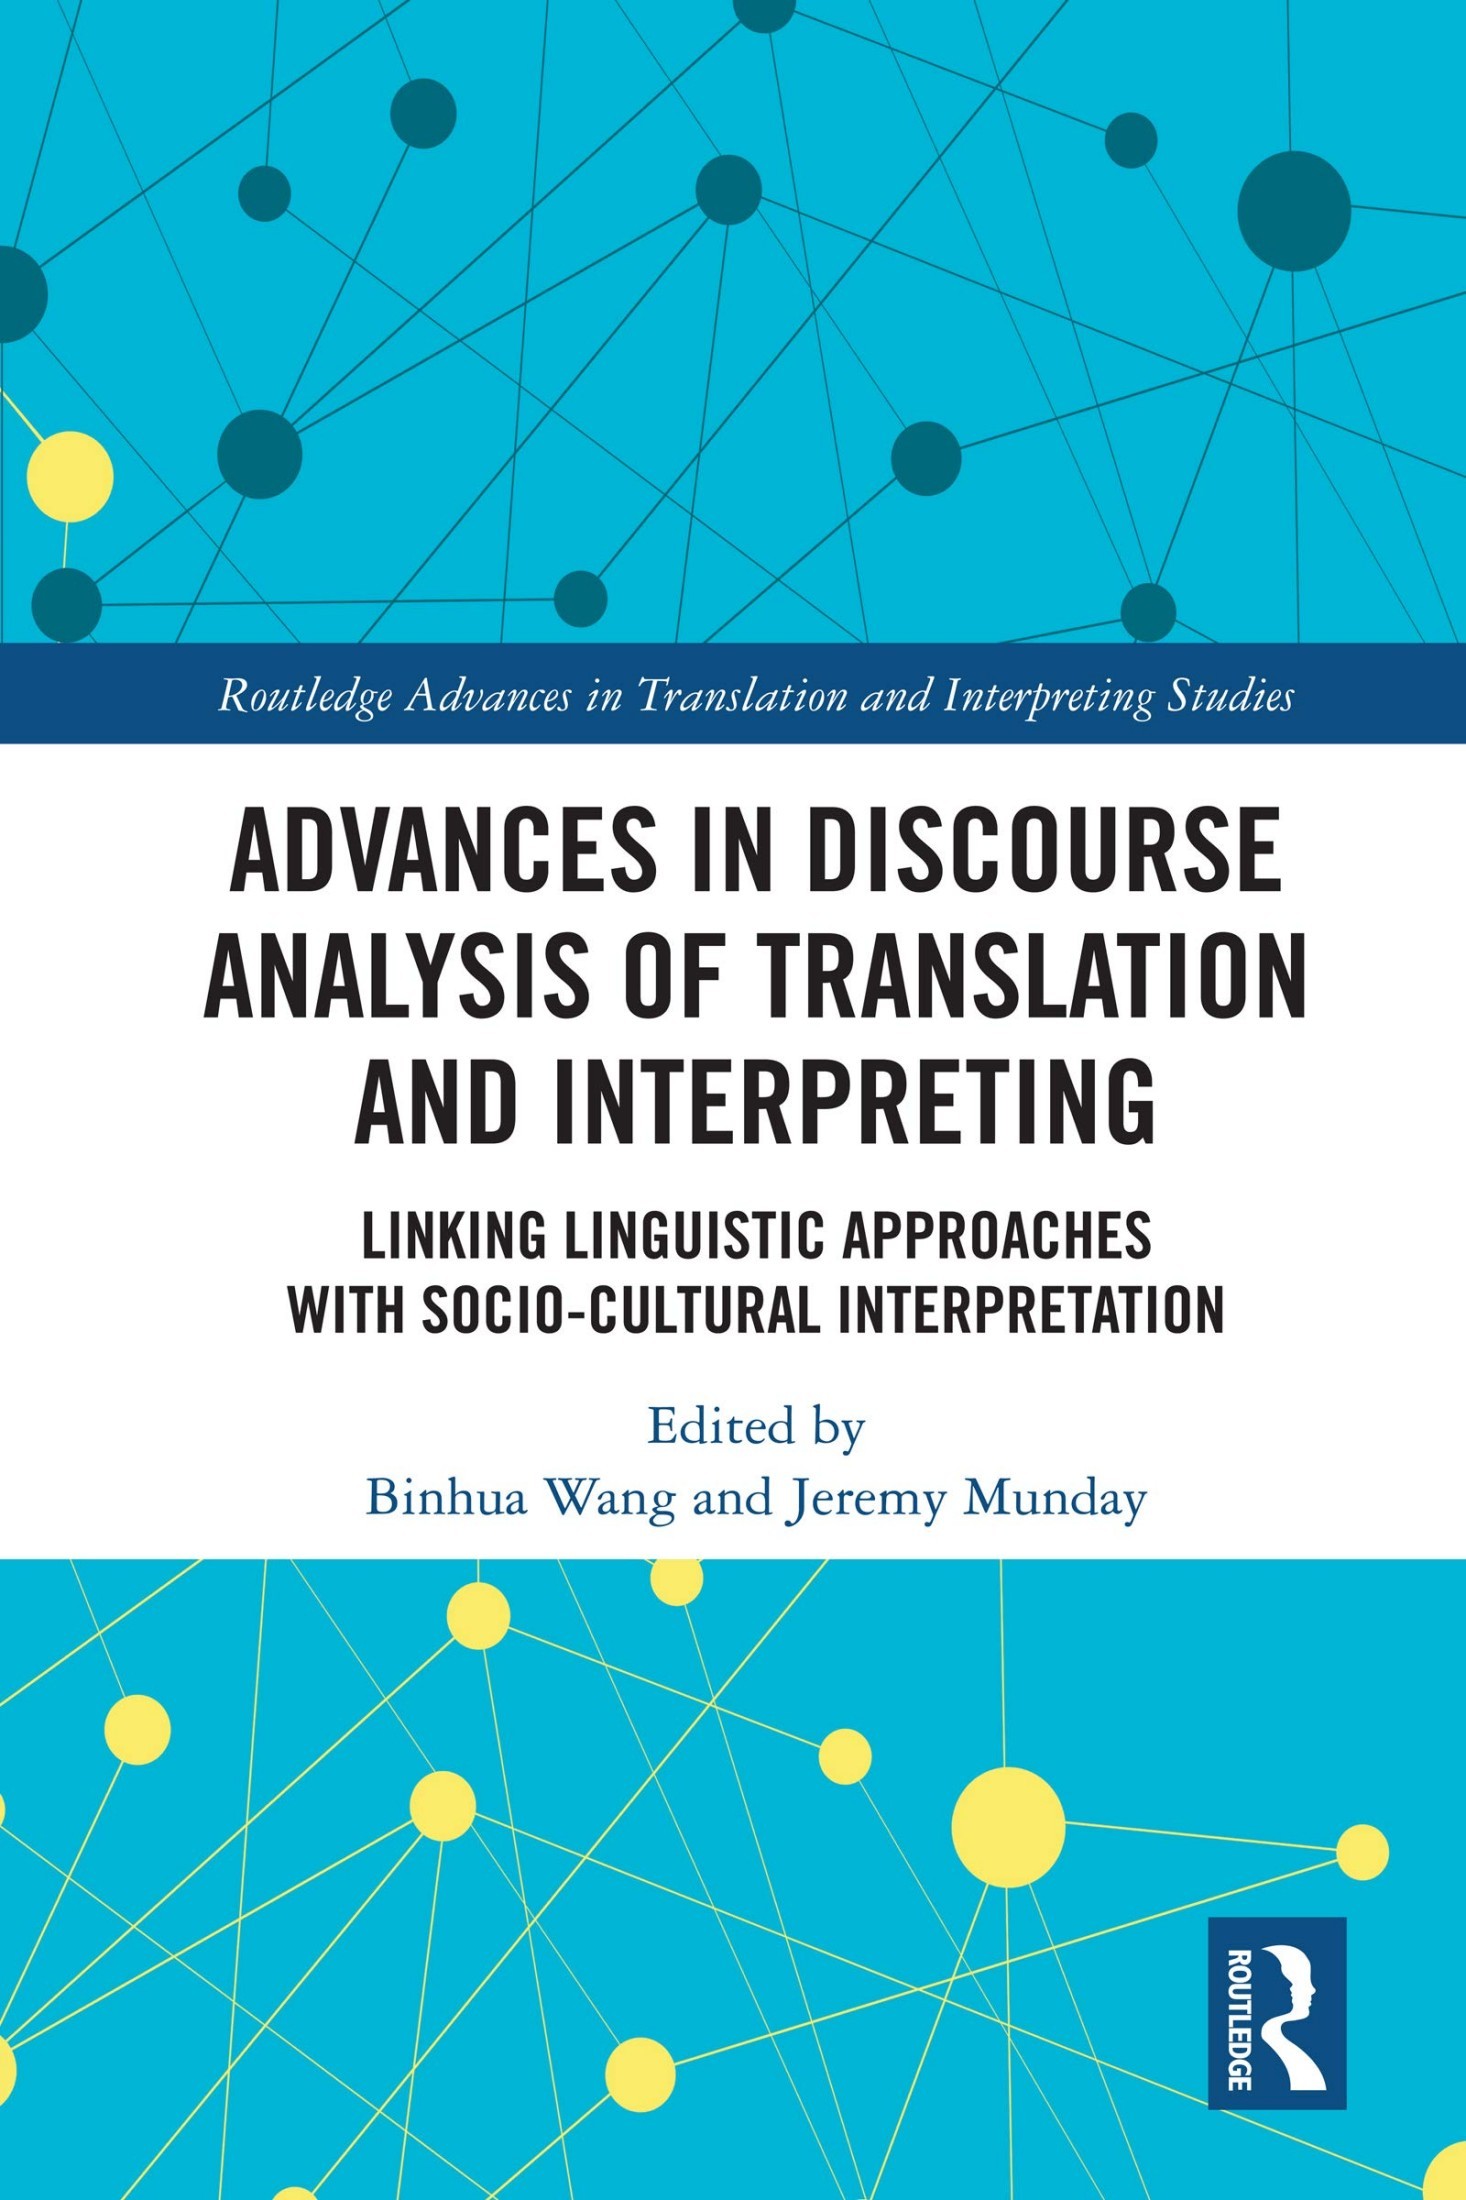 Advances in Discourse Analysis of Translation and Interpreting: Linking Linguistic Approaches with Socio-Cultural Interpretation